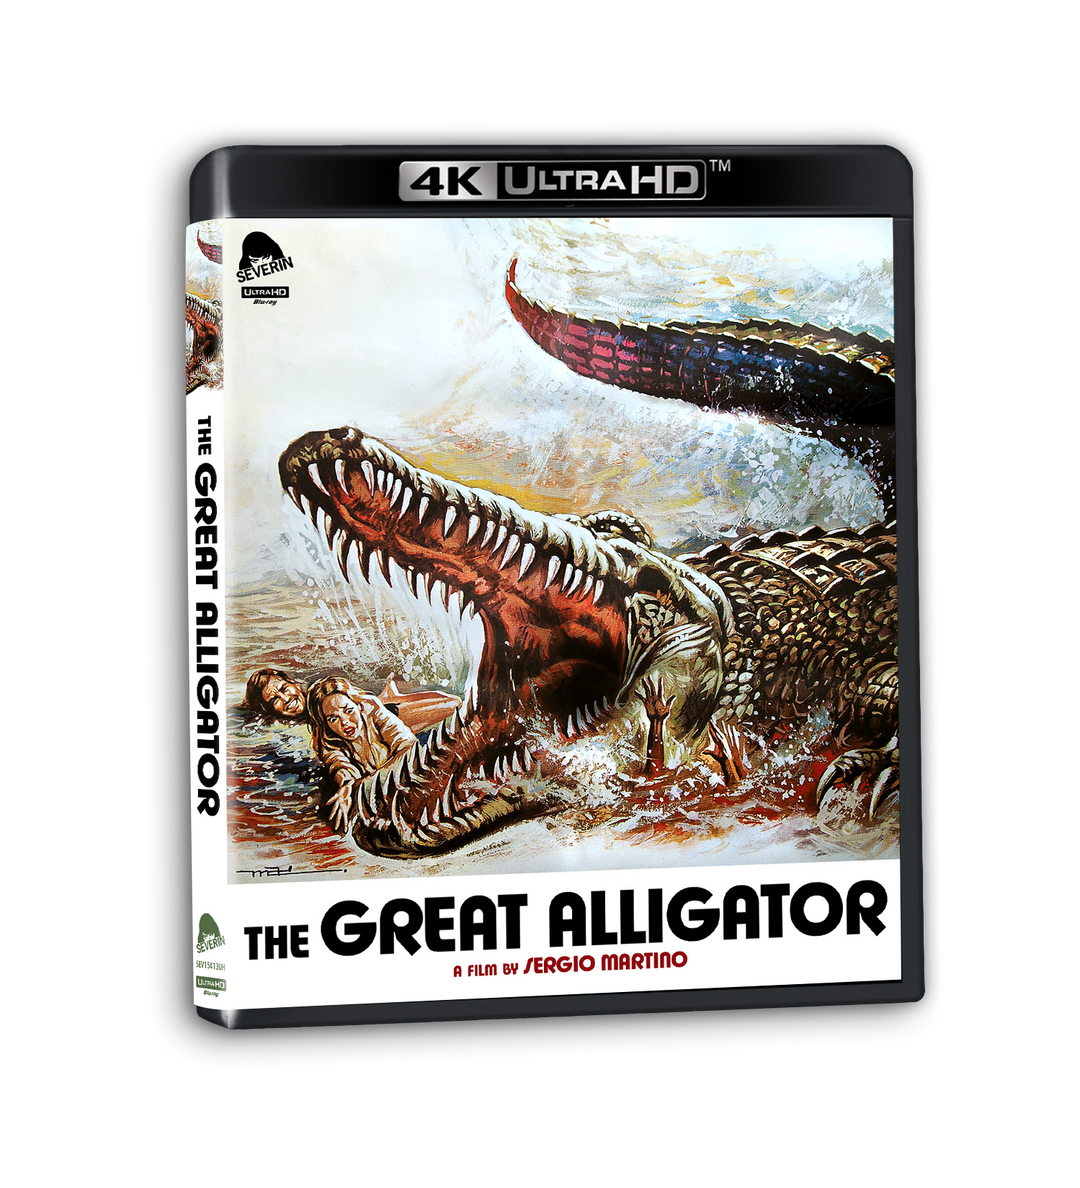 The Great Alligator [2-Disc 4K UHD w/Exclusive Slipcover]